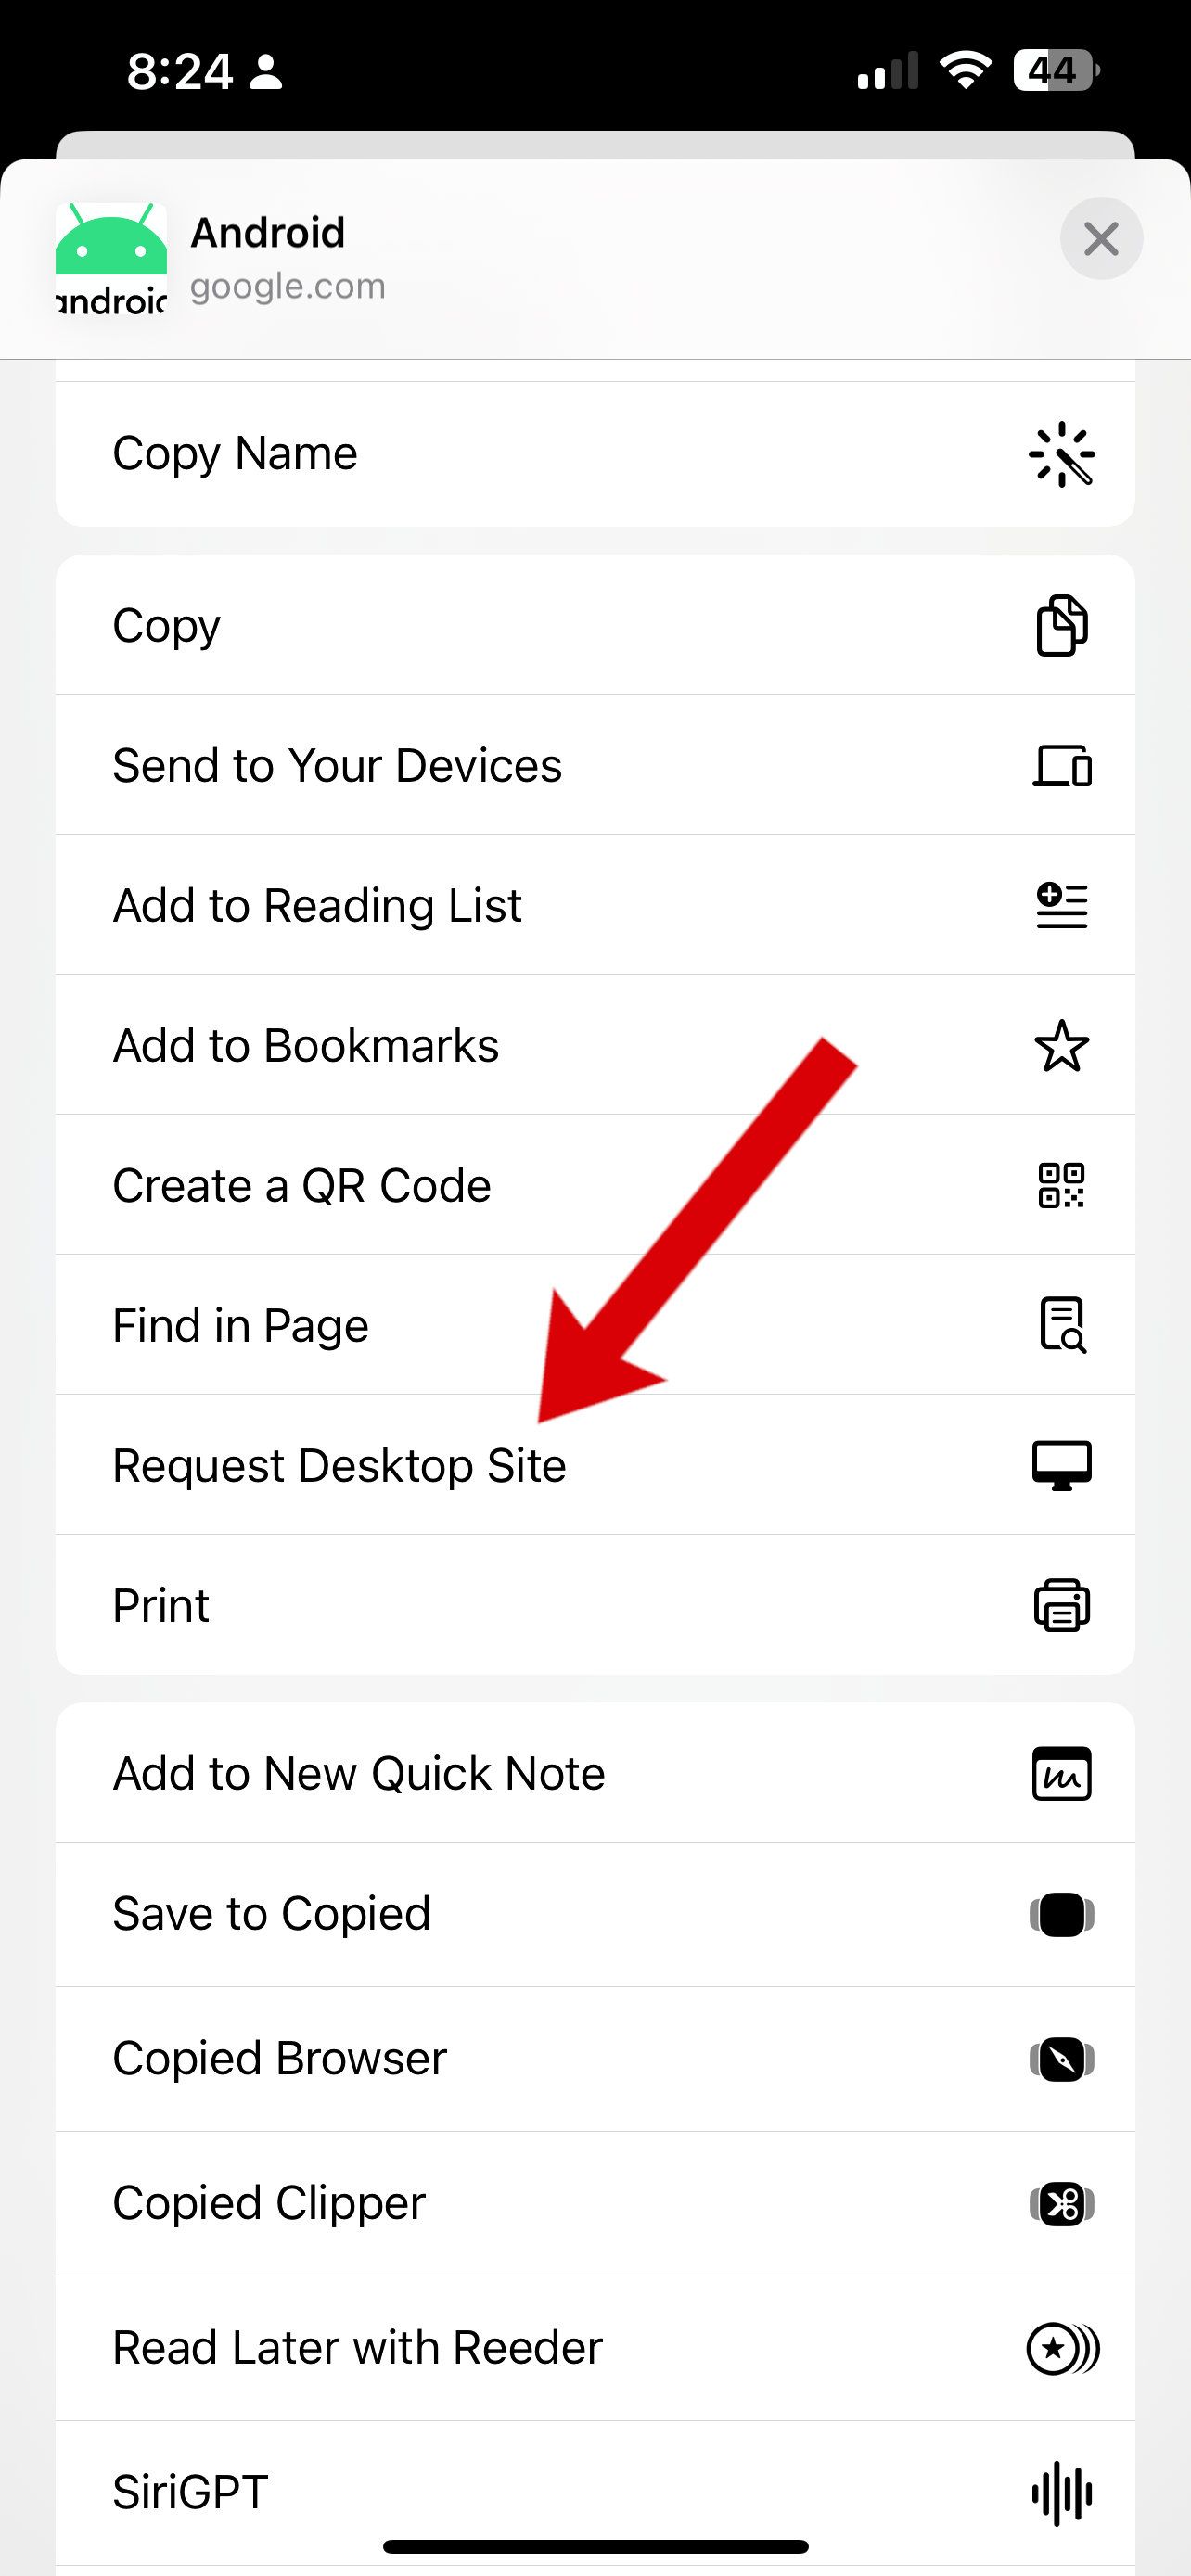 google chrome context menu on ios with arrow pointing to request desktop site option